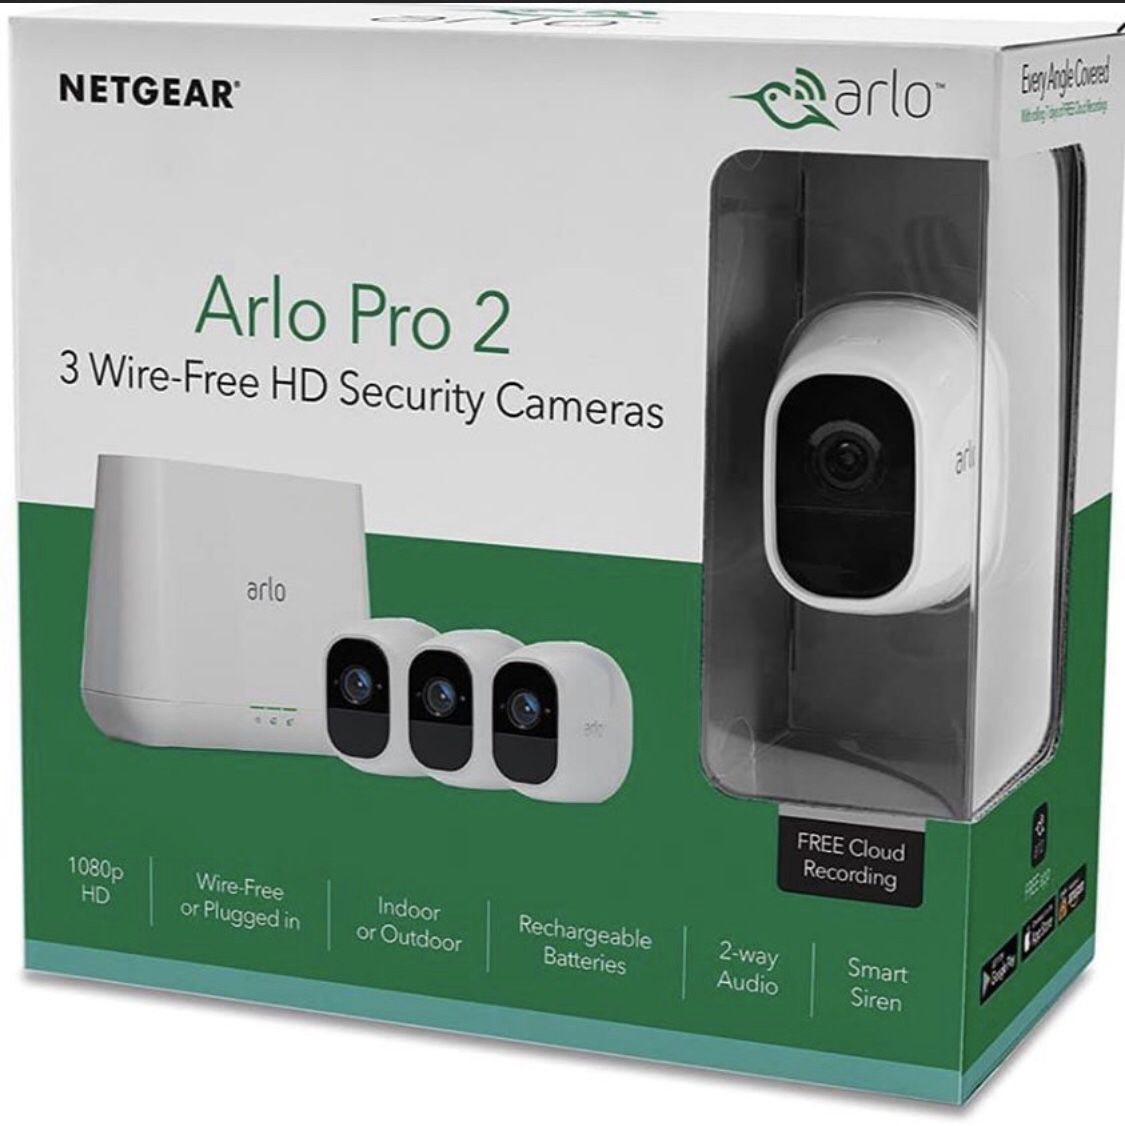 Arlo Pro 2 - 3 Wire-Free Camera 1080P HD Smart Security System